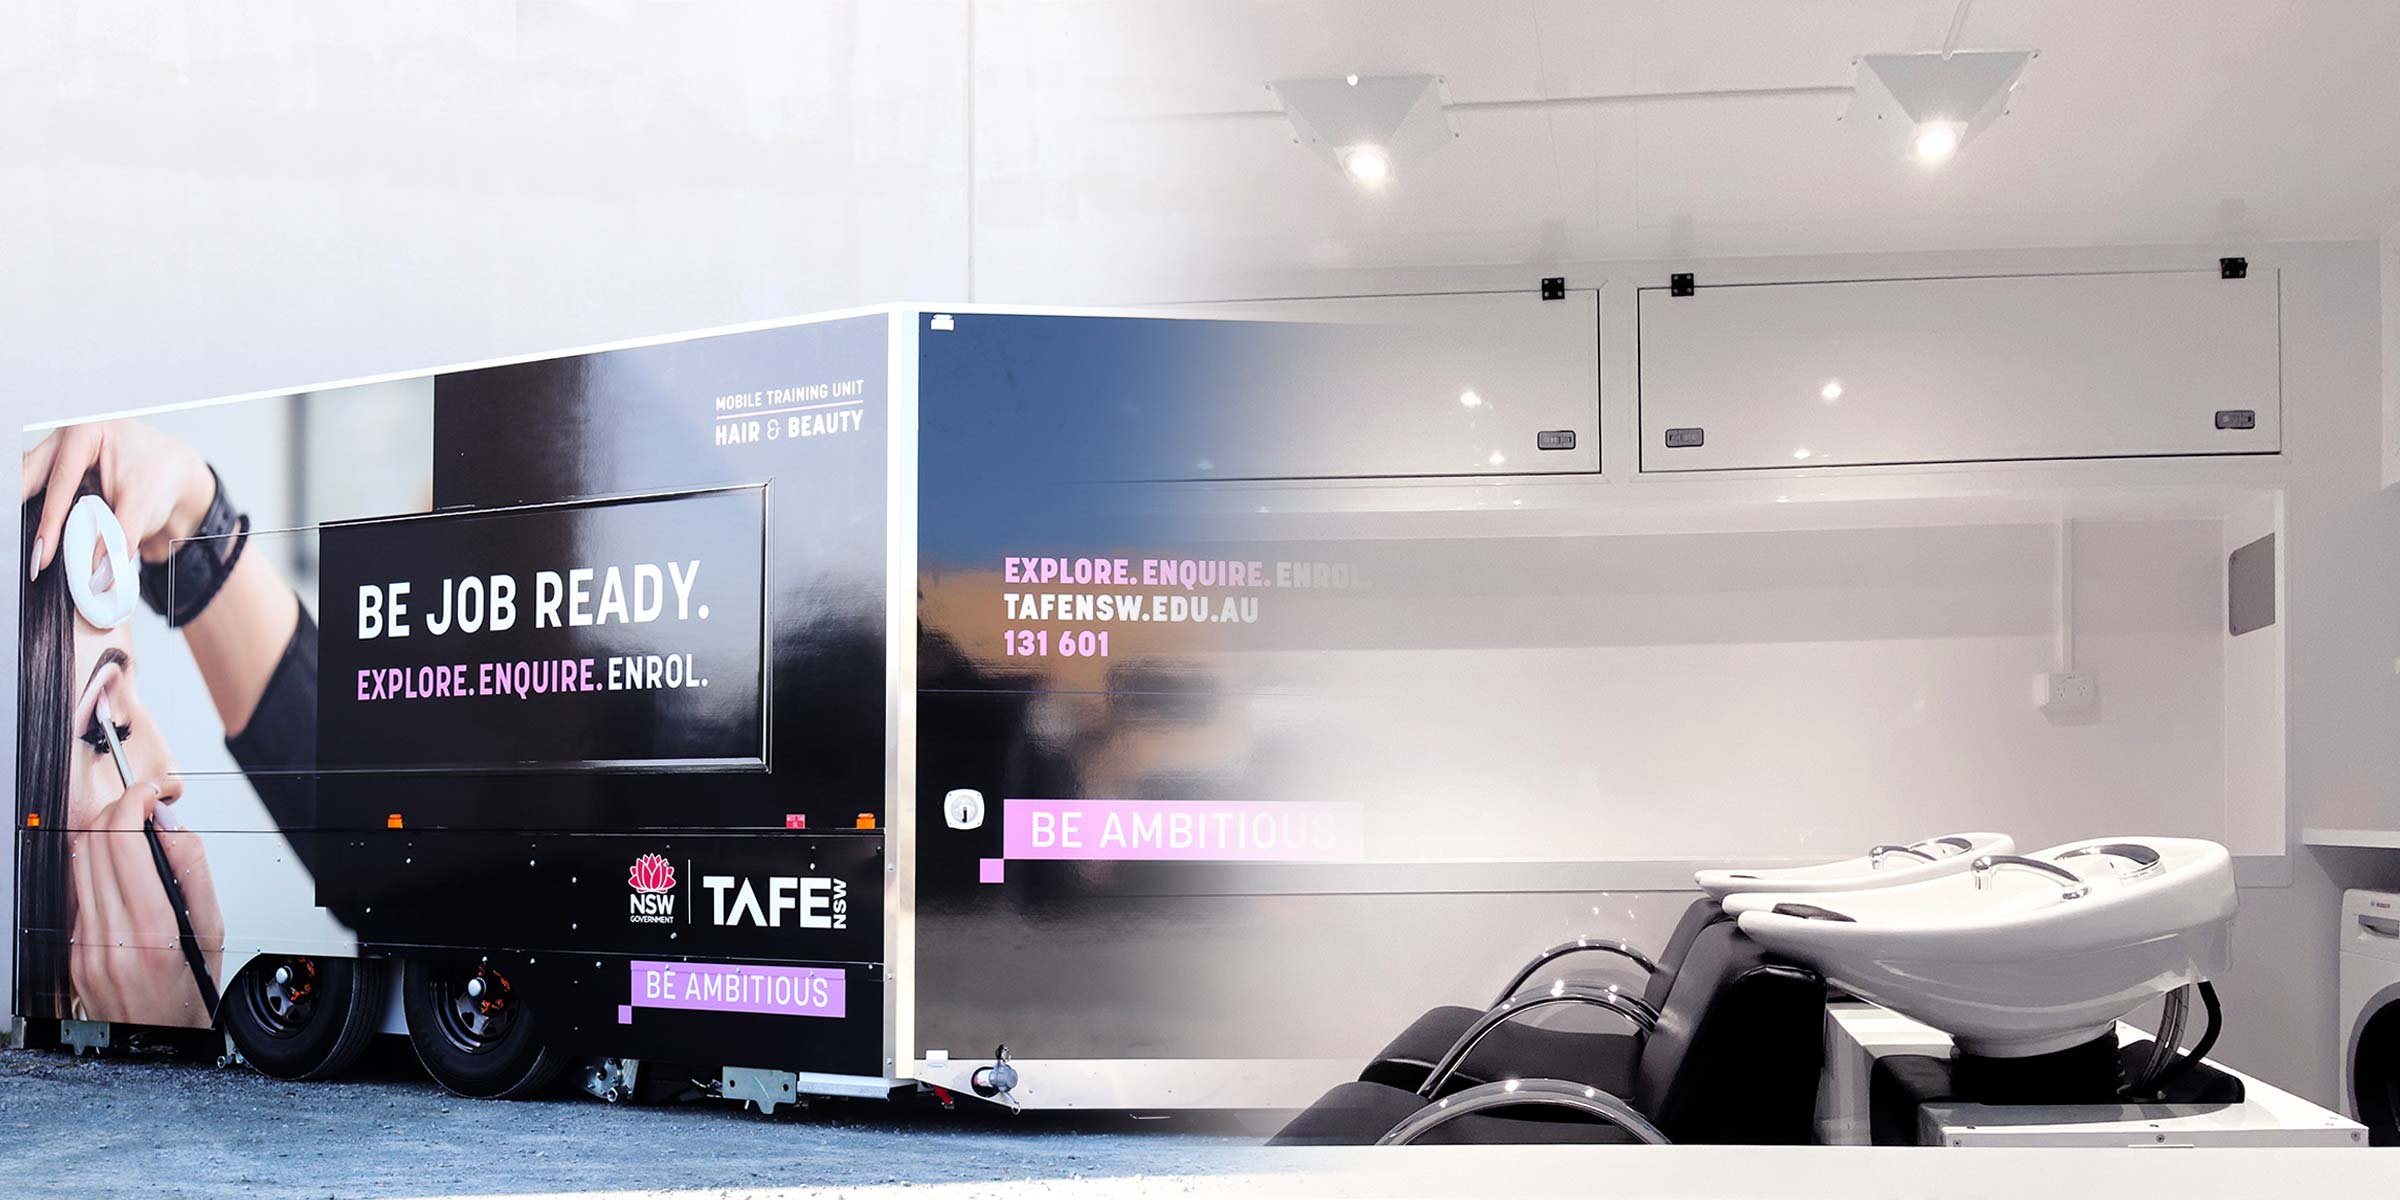 Internal and external design of Hairdressing and Beauty mobile training unit